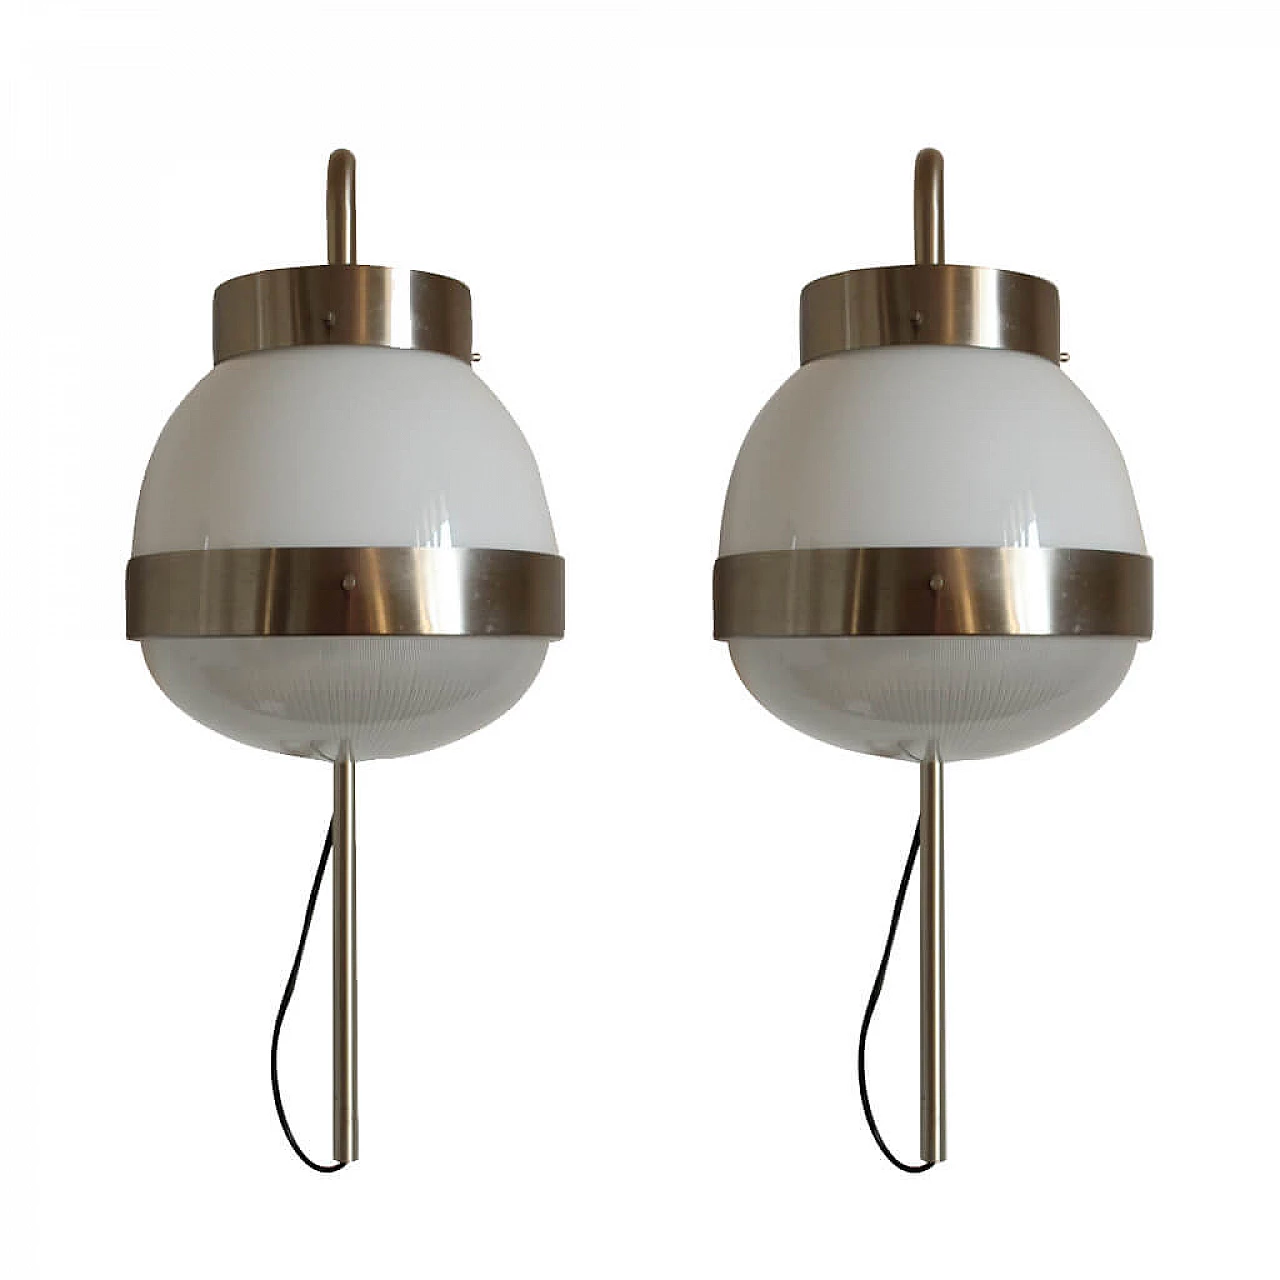 Pair of Delta wall lamps by Sergio Mazza for Artemide 1101025